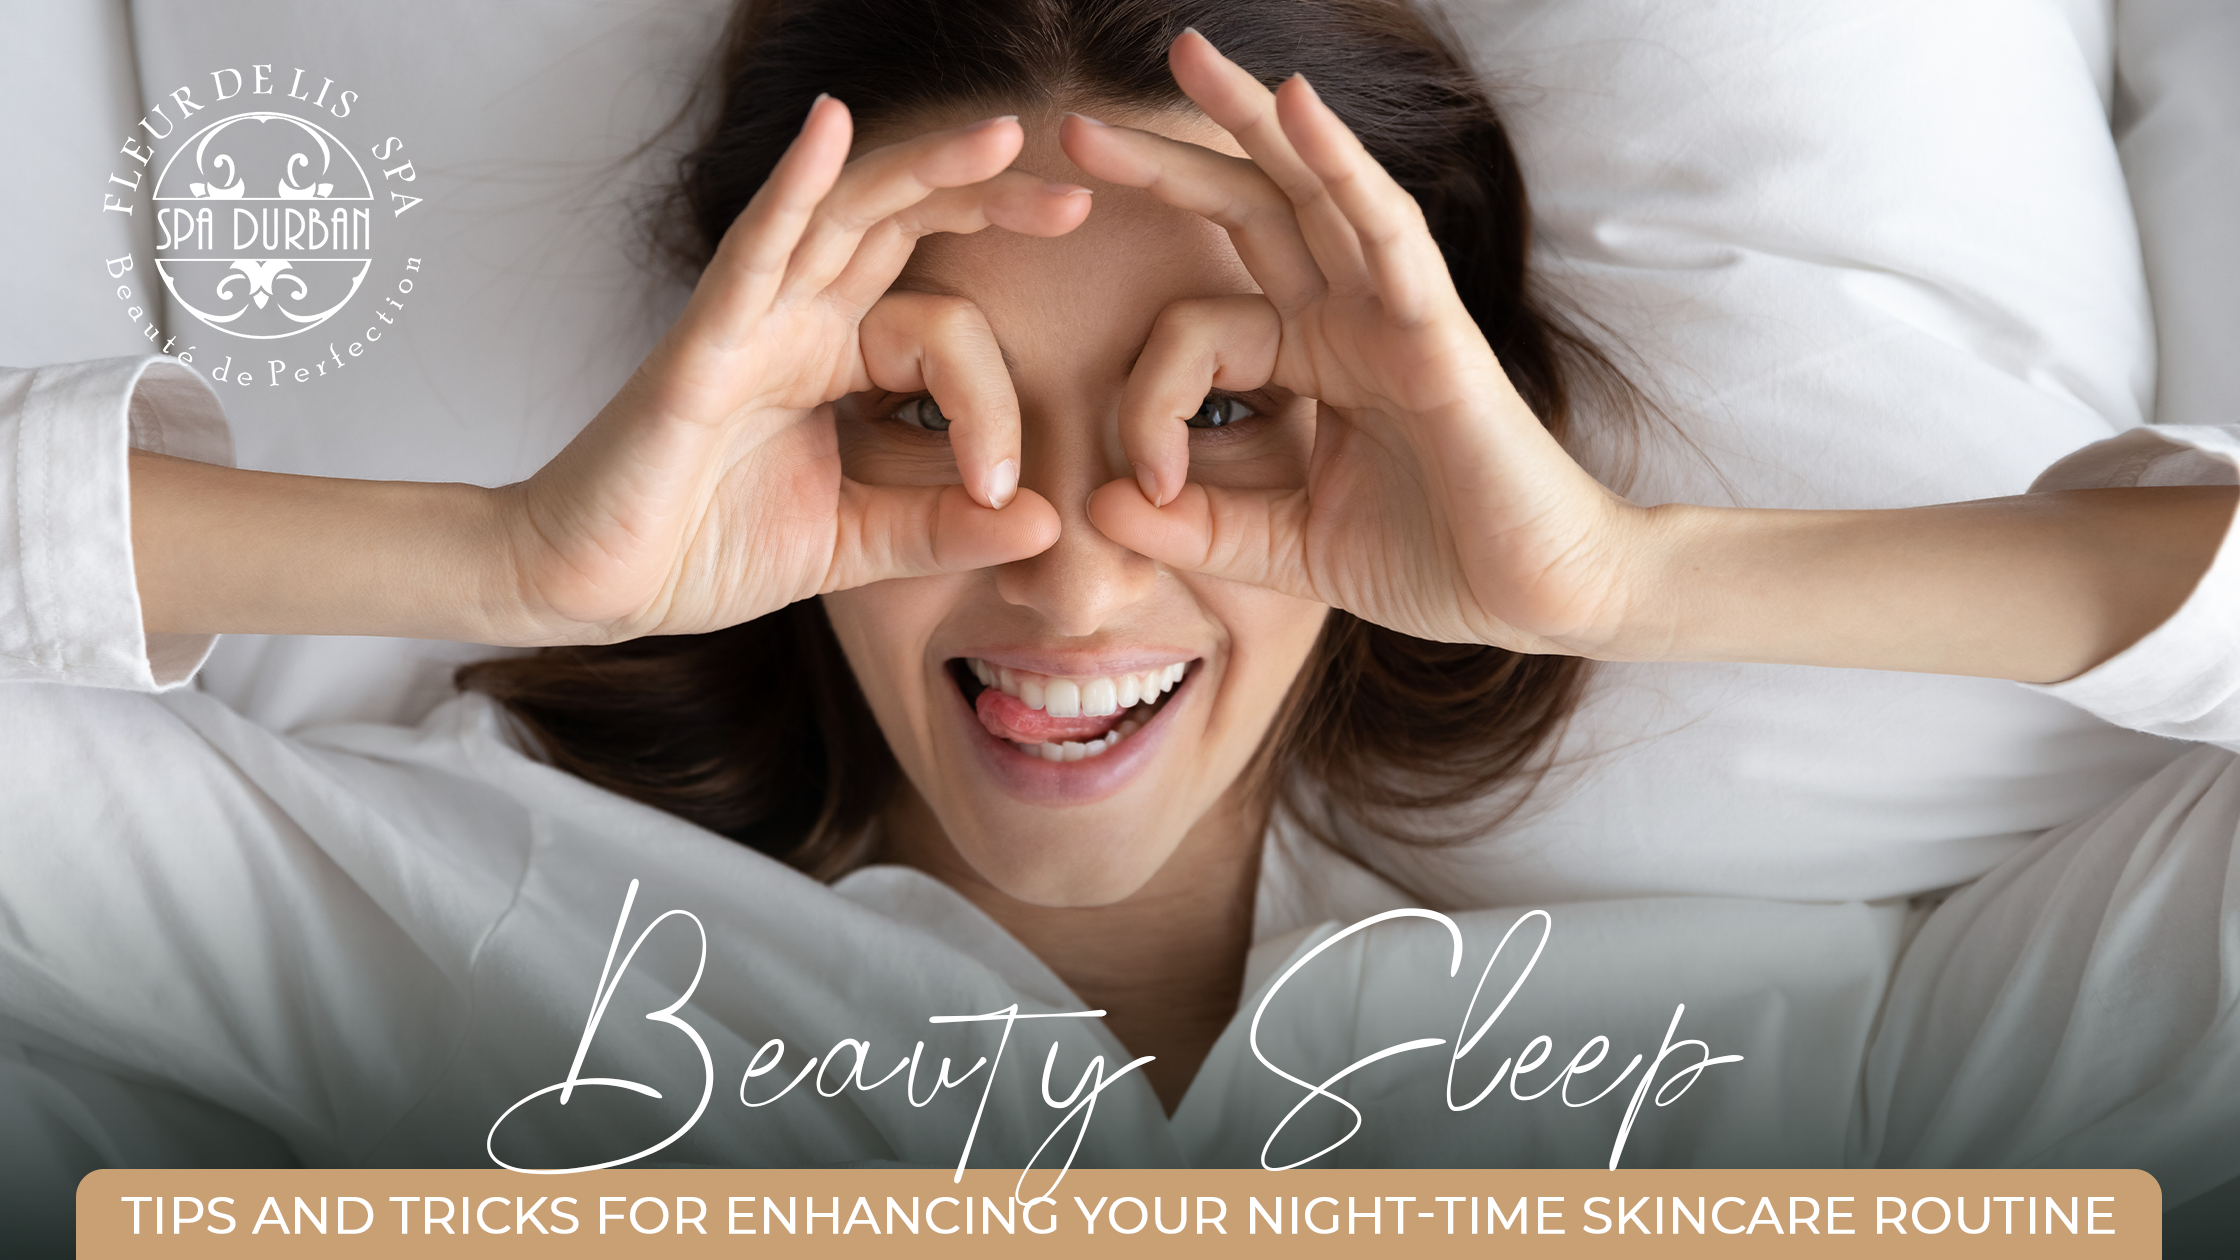 Beauty Sleep: Tips and Tricks for Enhancing Your Night-time Skincare Routine